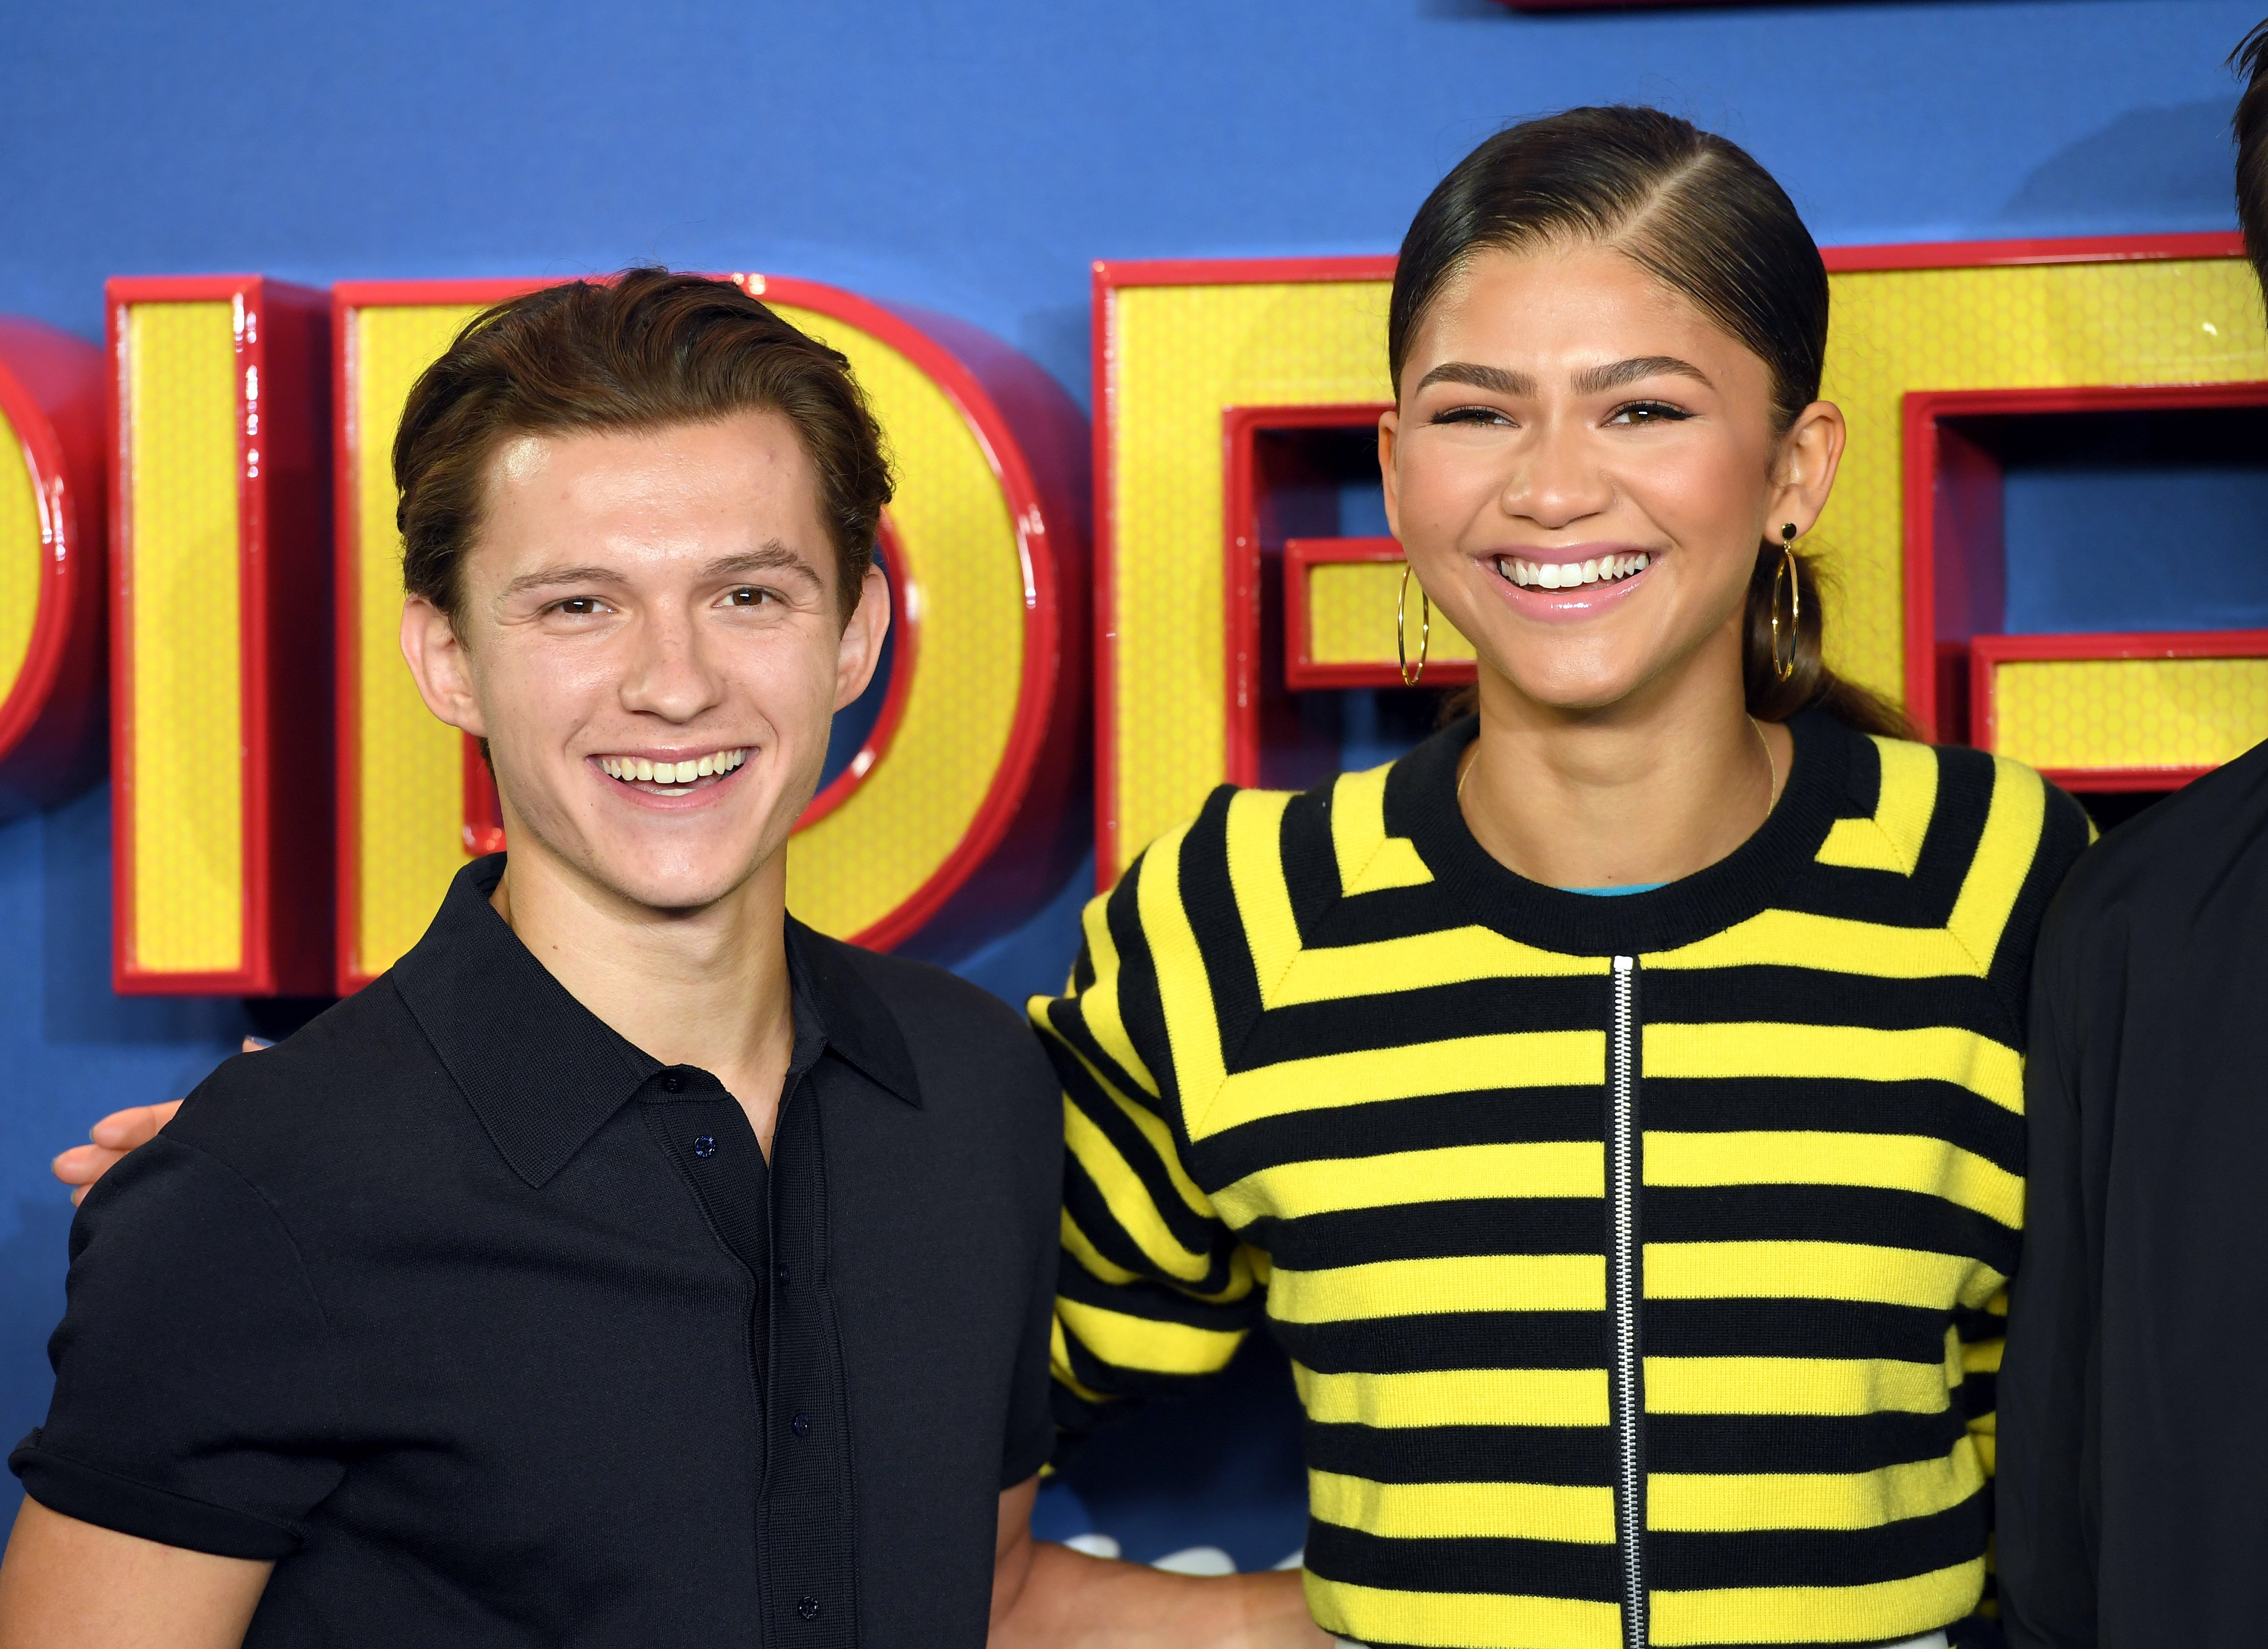 ‘Spider-Man’: Zendaya Said Peter Likes MJ’s ‘Little Quirks’ and They’re ‘Meant to Be Together’